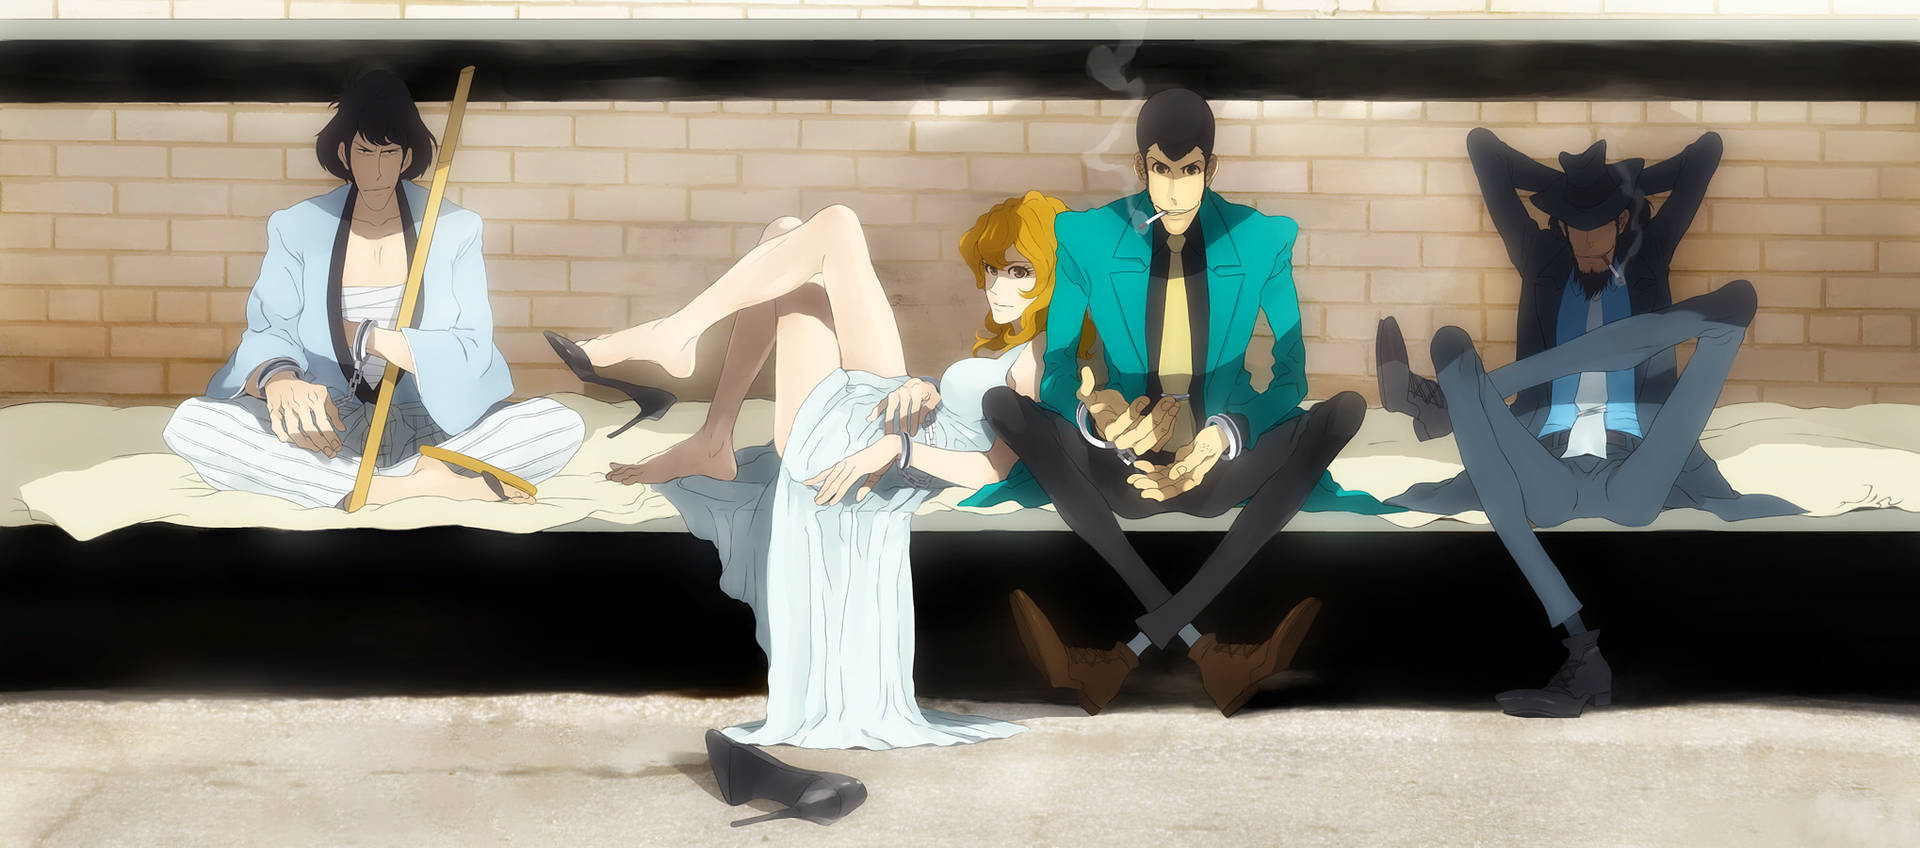 Widescreen Lupin The Third Background